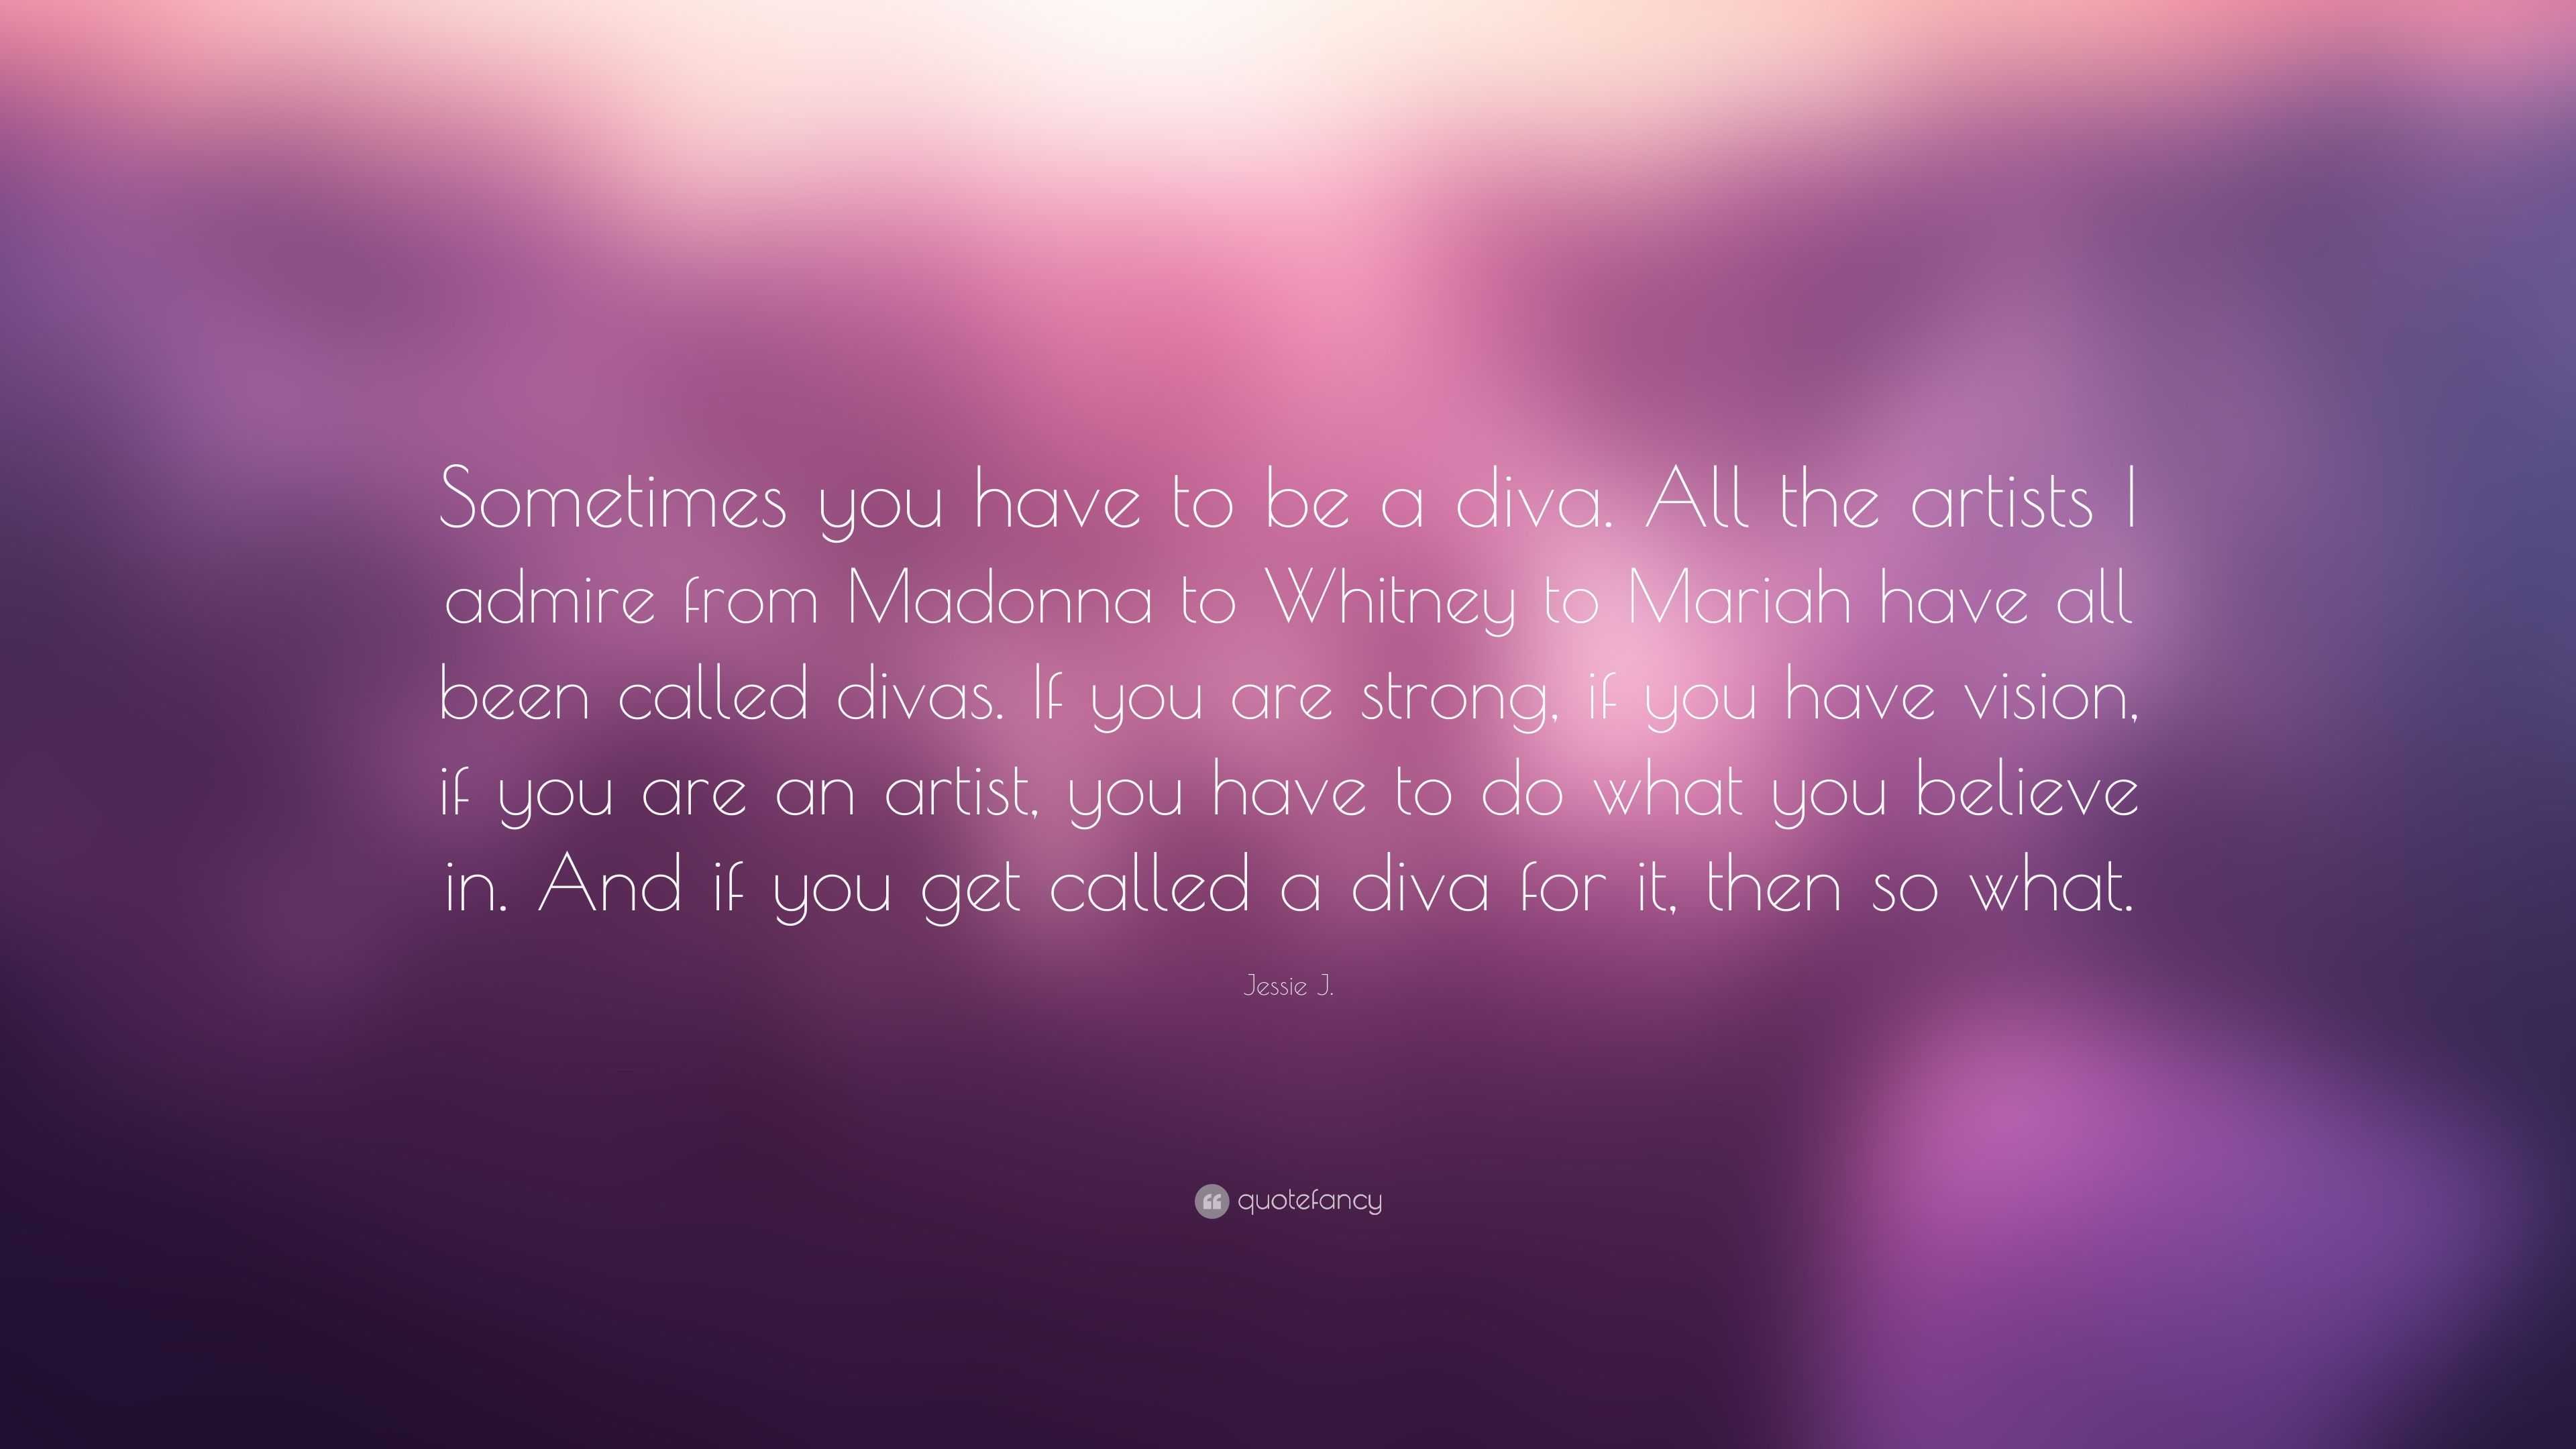 Jessie J. Quote: “Sometimes you have to diva. All the artists I admire from Madonna to Whitney to Mariah have all been called divas. ...”